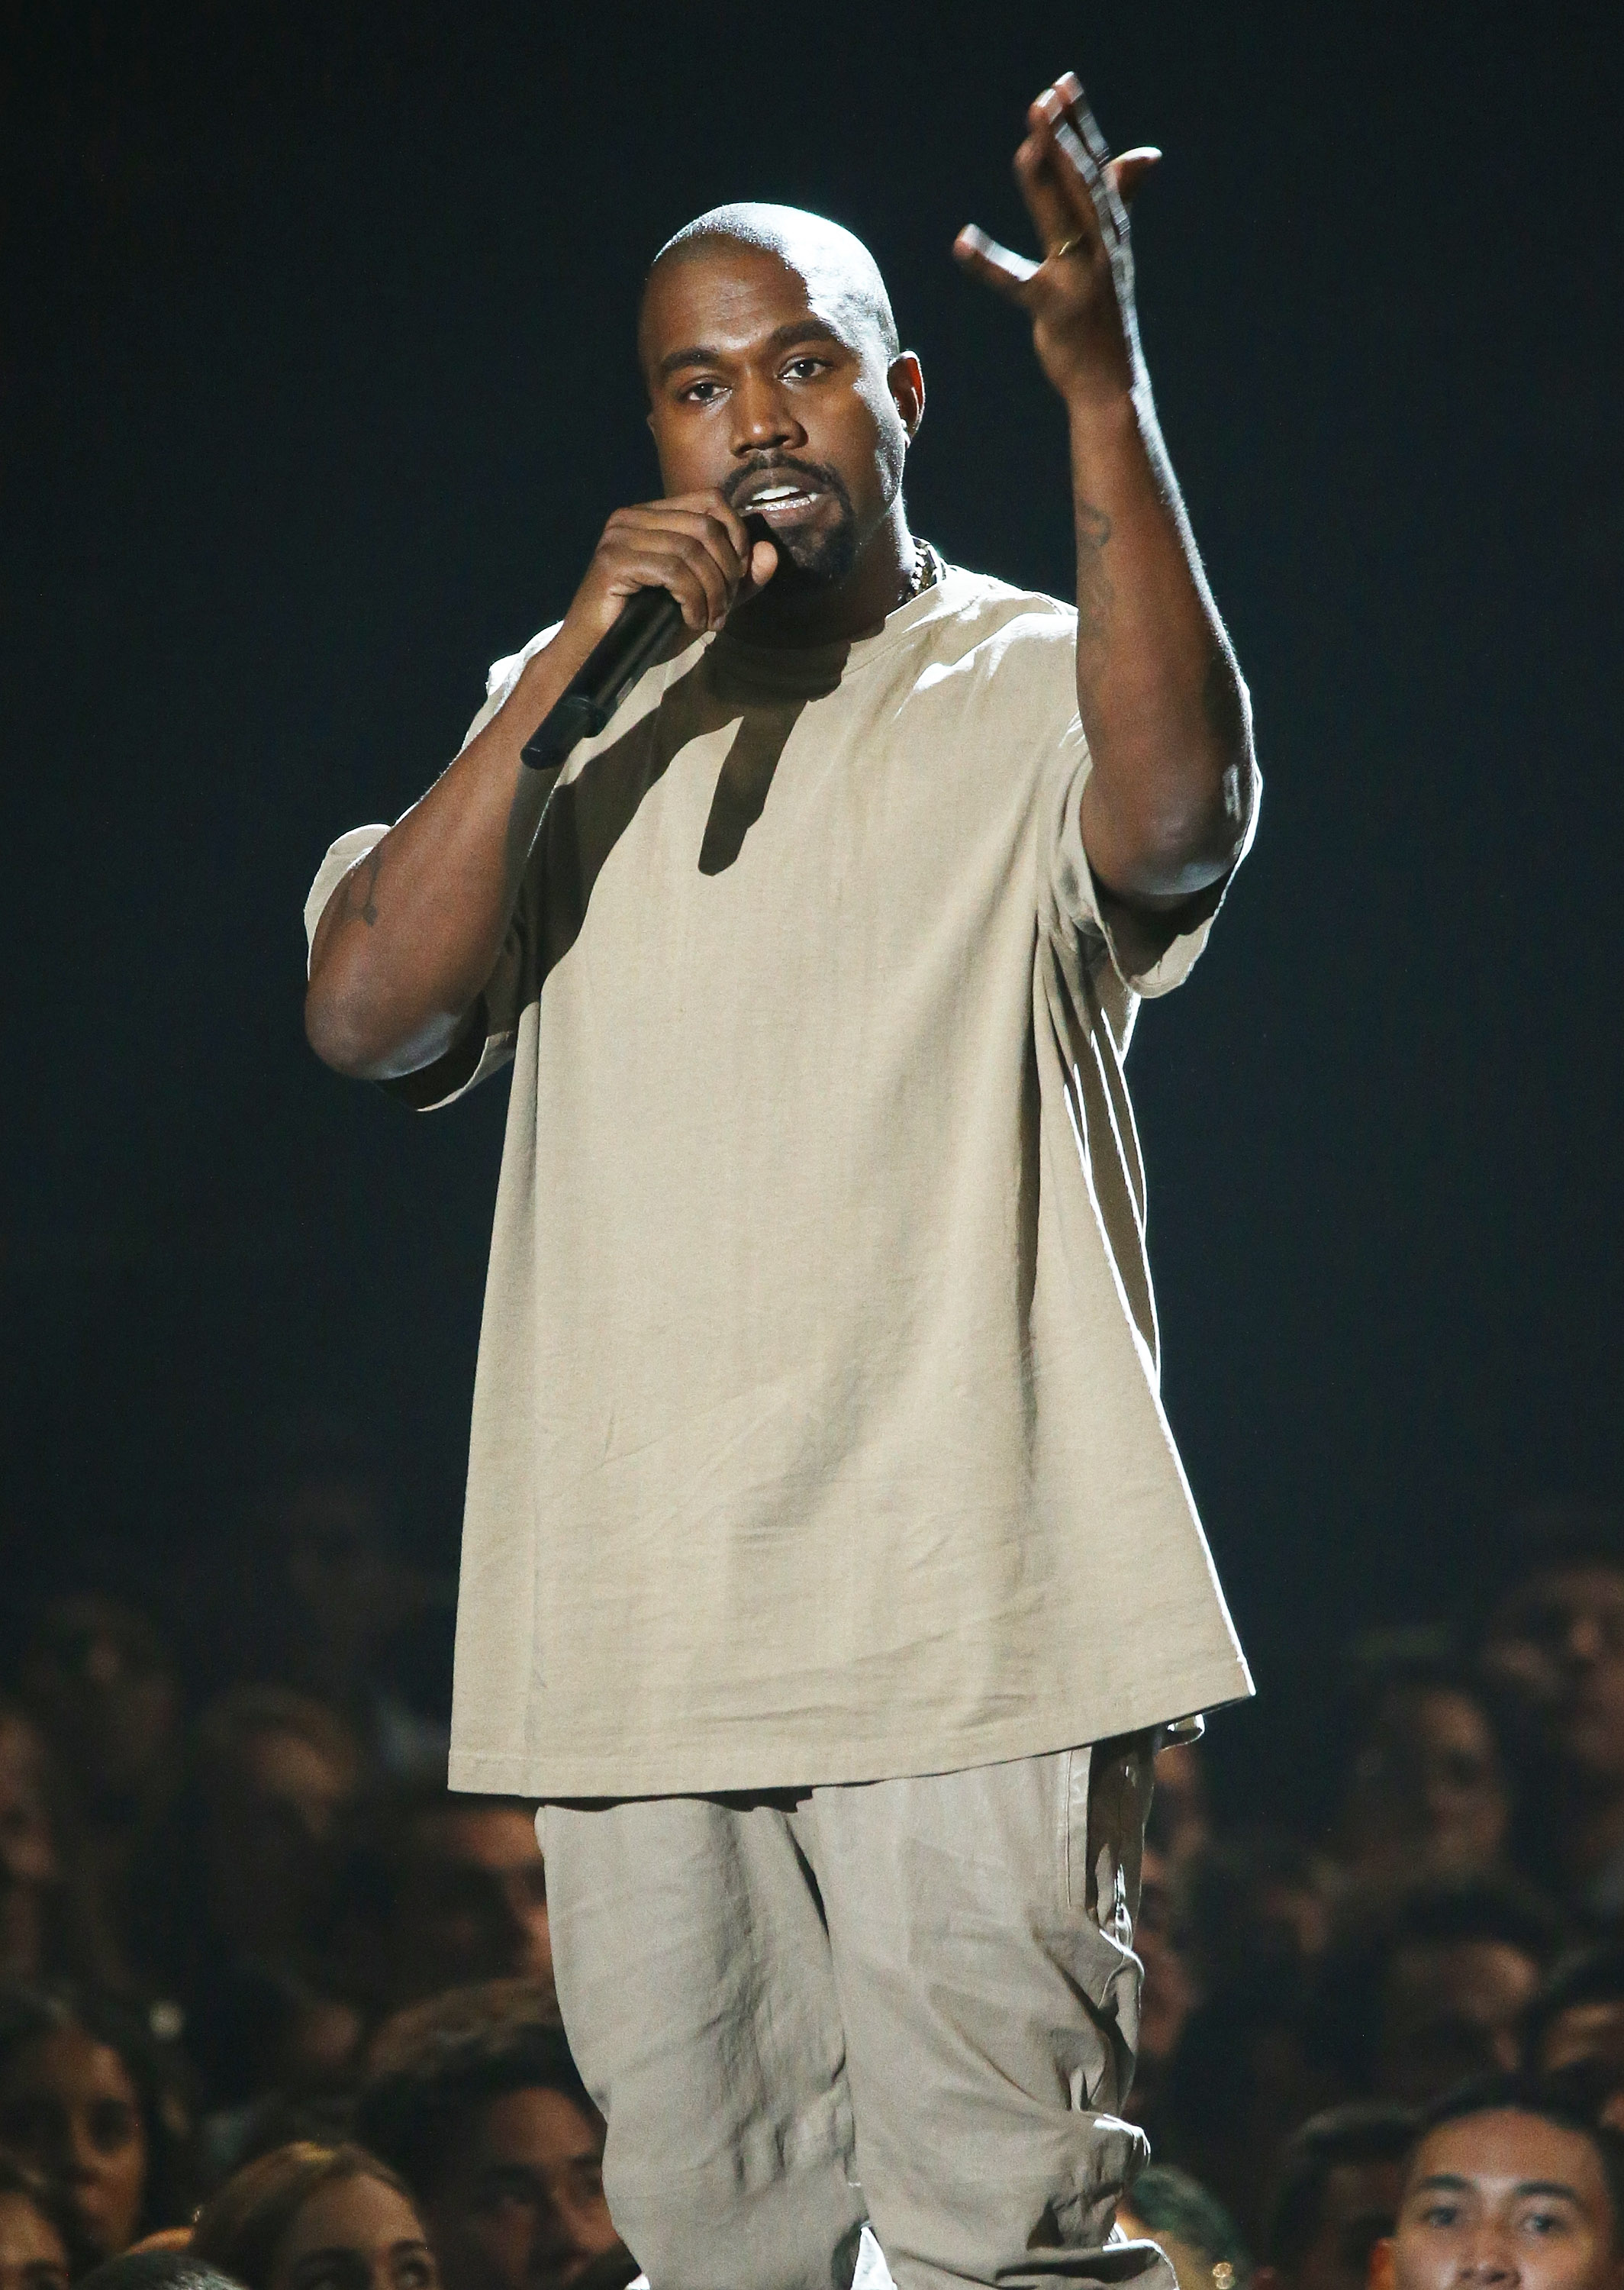 Kanye West at the 2015 MTV Video Music Awards in Los Angeles on Aug. 30, 2015. (Michael Tran—Getty Images)